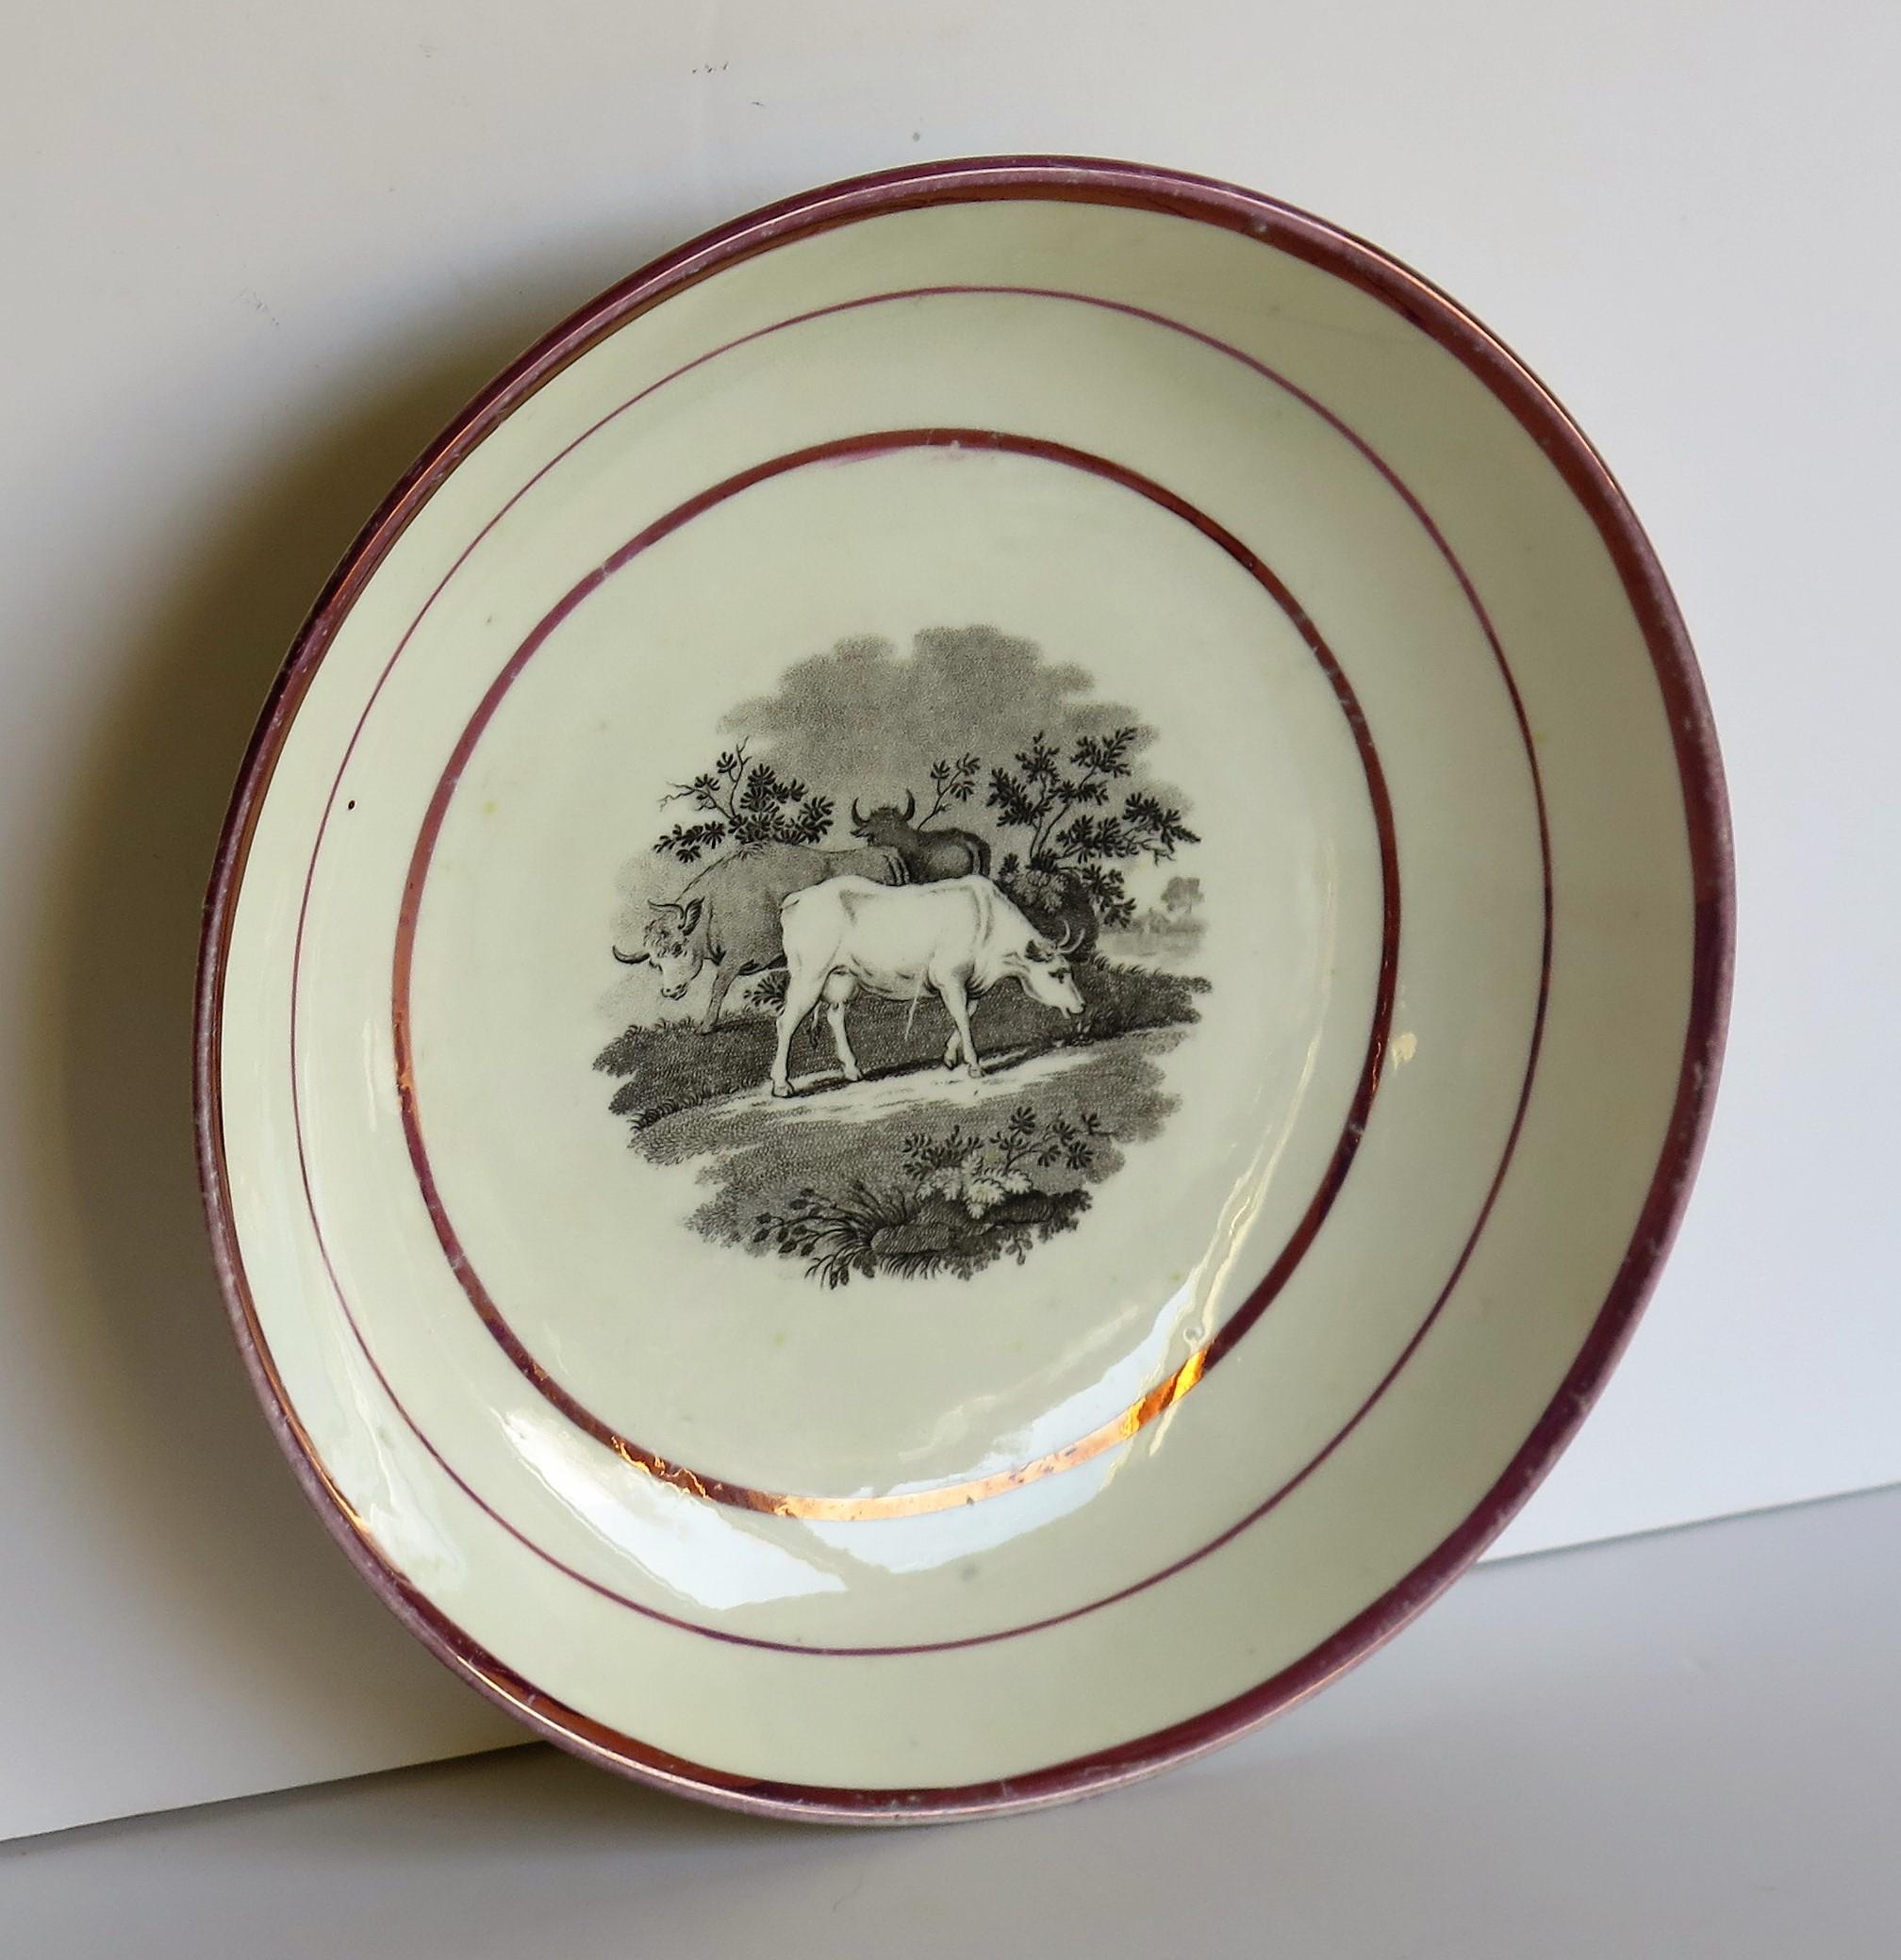 Georgian Sunderland Porcelain Lustre Dish or Plate, English Early 19th Century For Sale 2